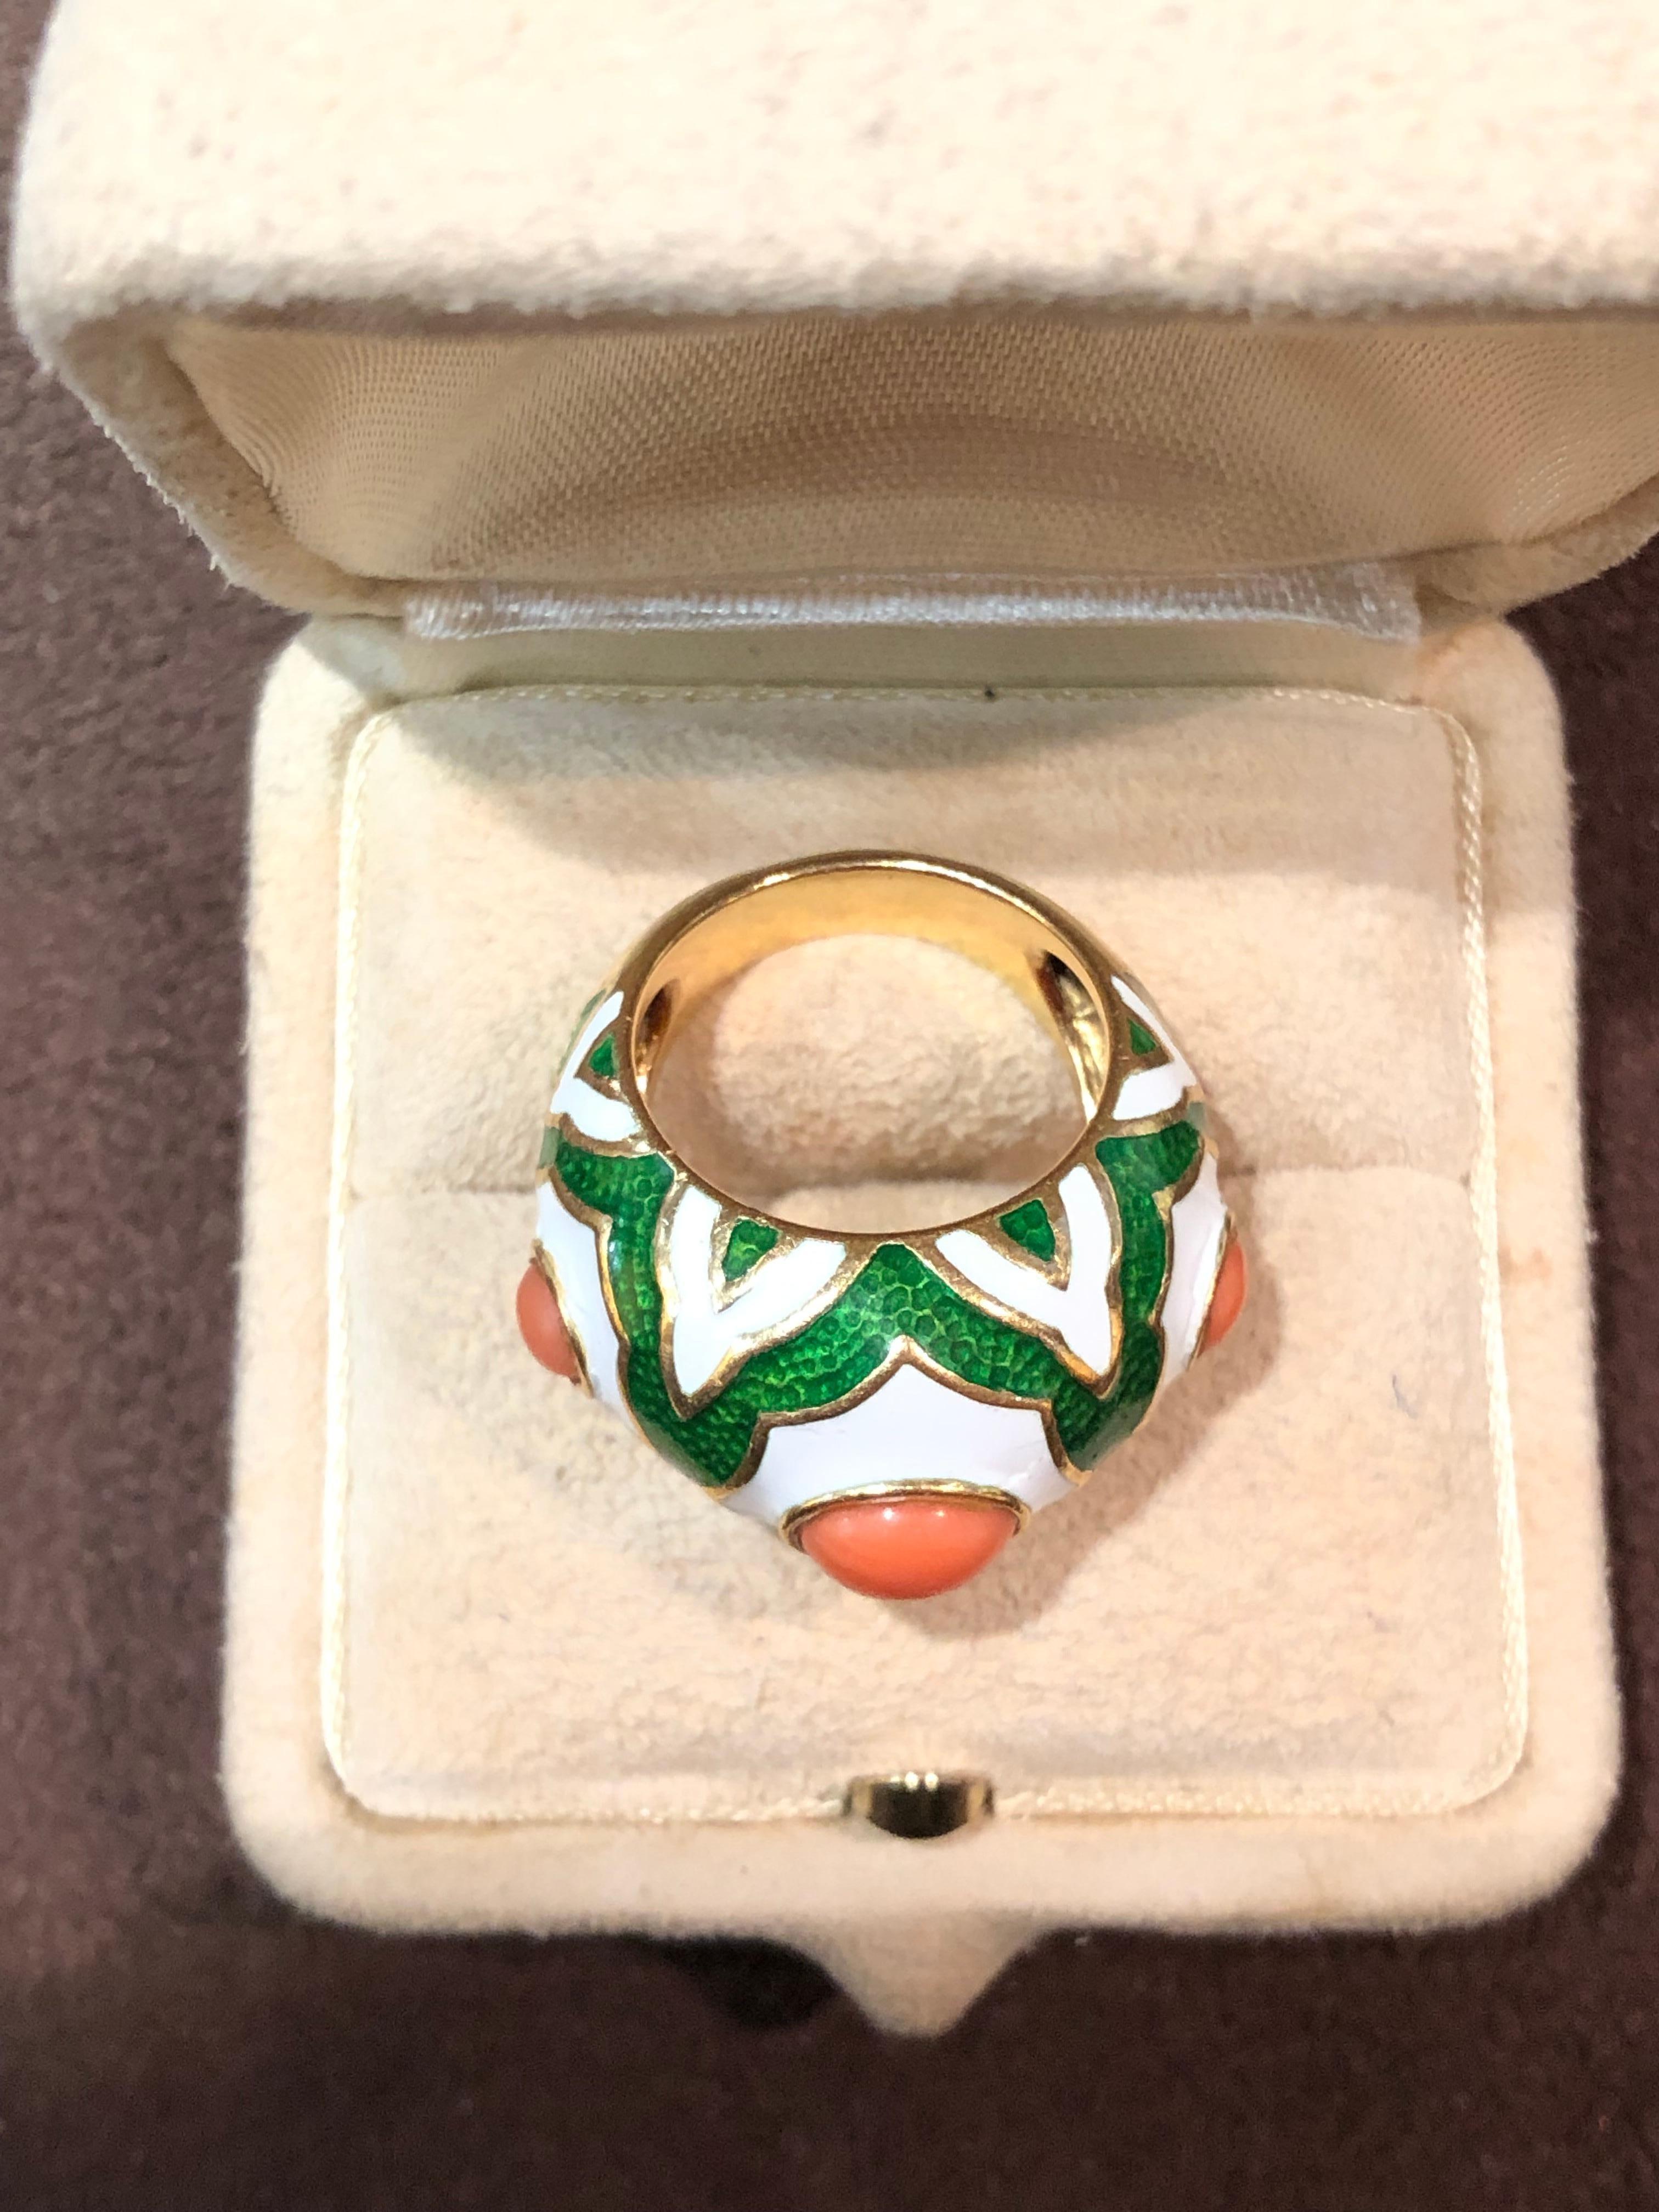 VAN CLEEF & ARPELS ring in yellow gold set with white enamel, green enamel and three coral cabochon cut. 
Made in the 70'
Signed and numbers.
15,95 grams. 
Comes with original Van Cleef & Arpels box. 